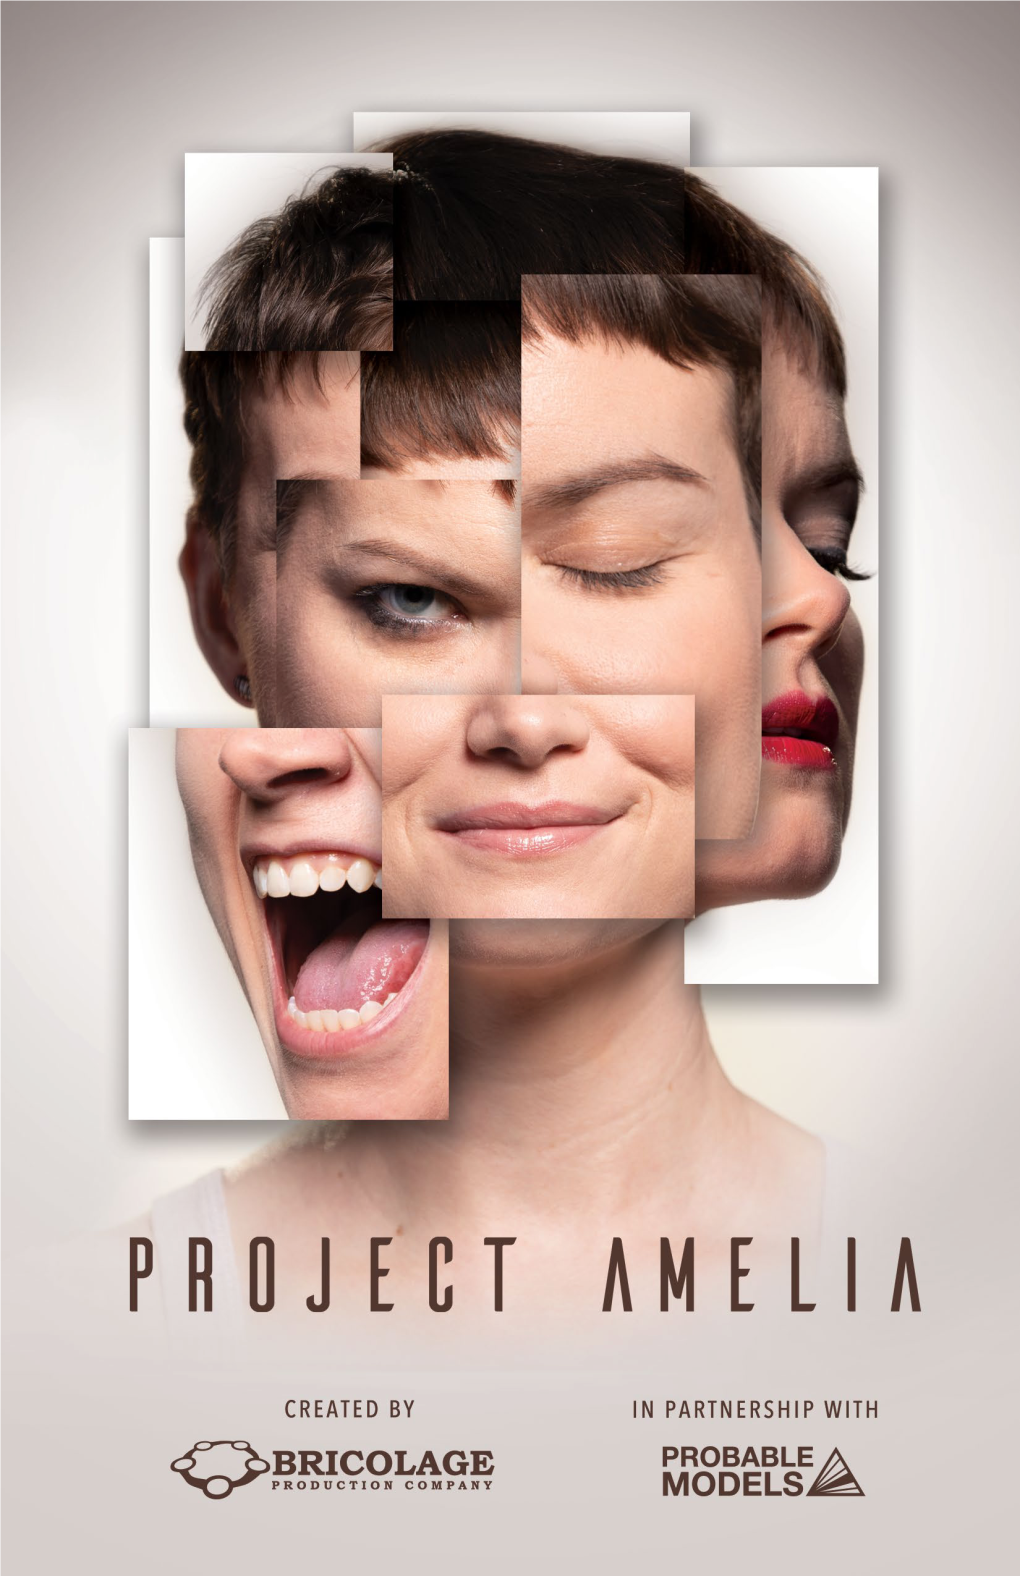 PROJECT AMELIA Supporters Without These Believers, Project Amelia Would Not Be Possible